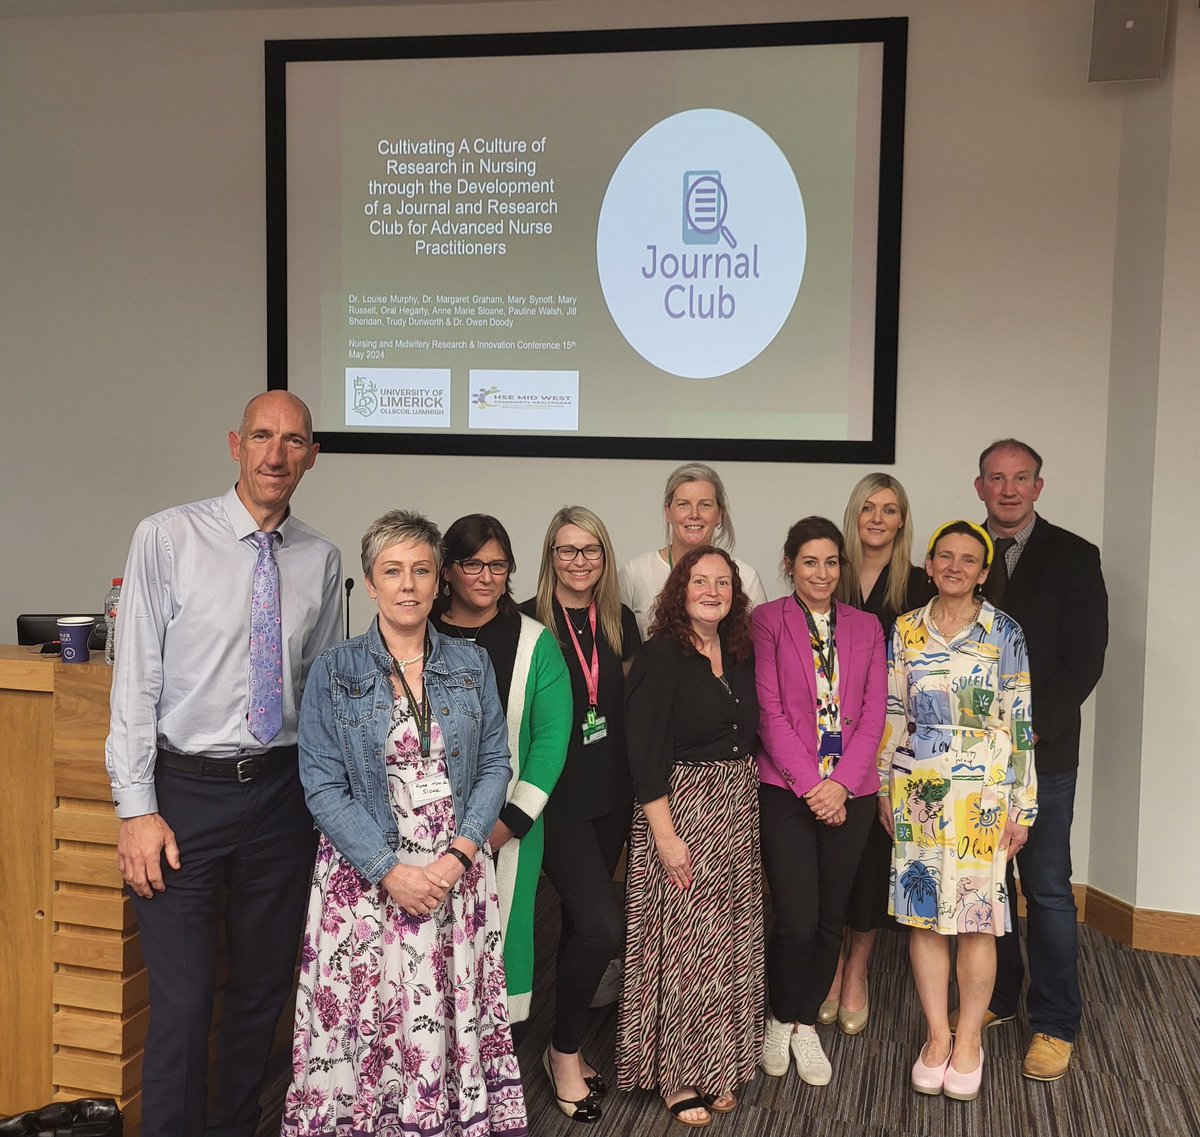 Mental Health ANPs front and centre at today's 9th Nursing and Midwifery Research Conference in the MW. Collaboration between Services and University of Limerick positively contributing to the evidence base. @CommHealthMW @hammersley_ann @nmpduwest @NursingMid_UL @fkilloury1